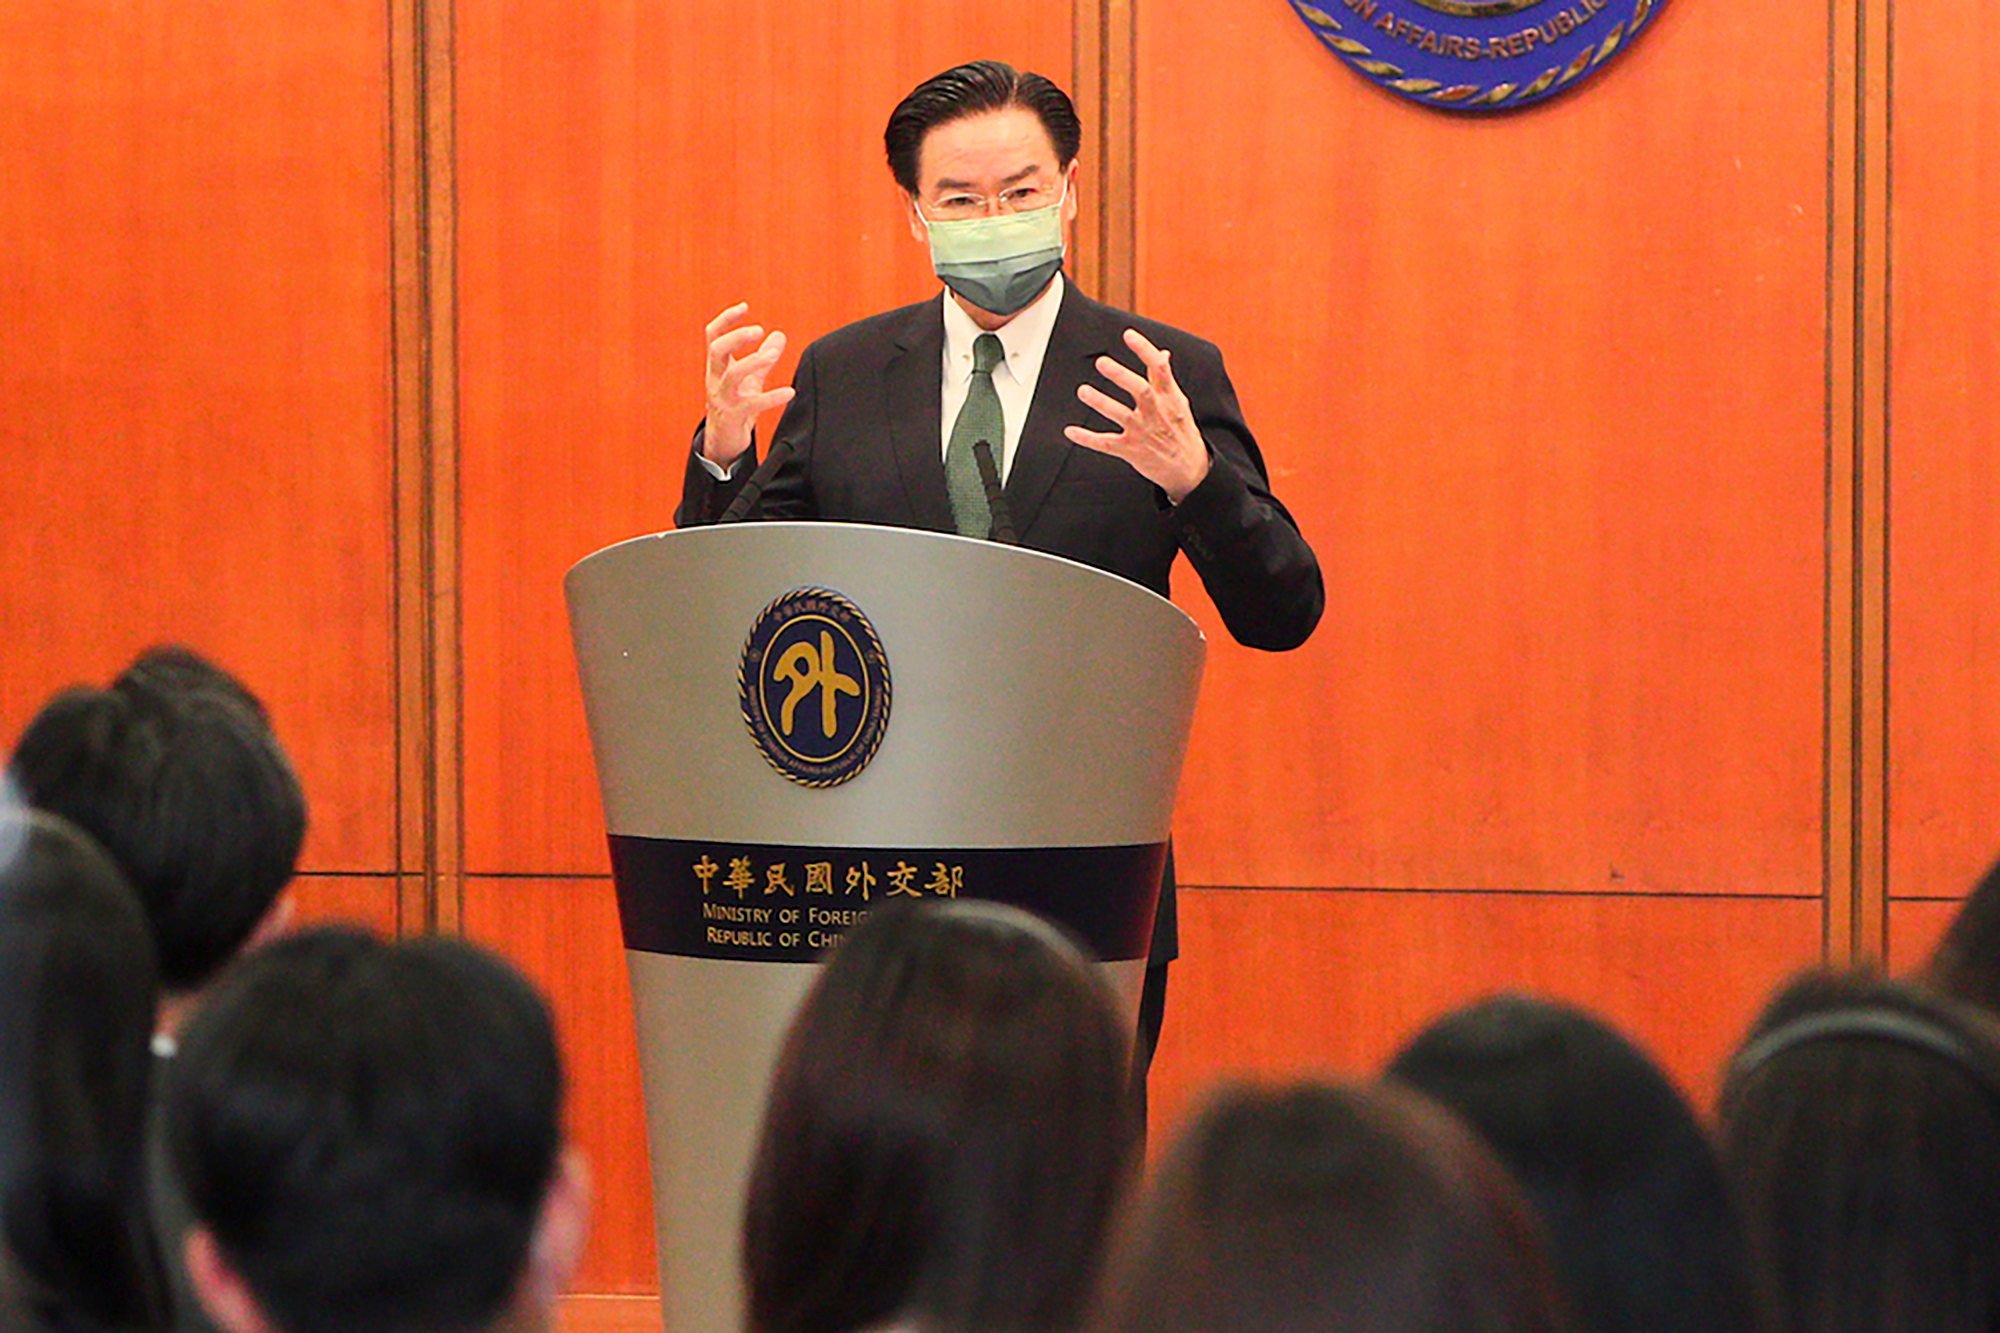 Joseph Wu, Taiwan’s foreign minister, during a press conference in Taipei on Tuesday. Photo: Taiwan Ministry of Foreign Affairs via AP